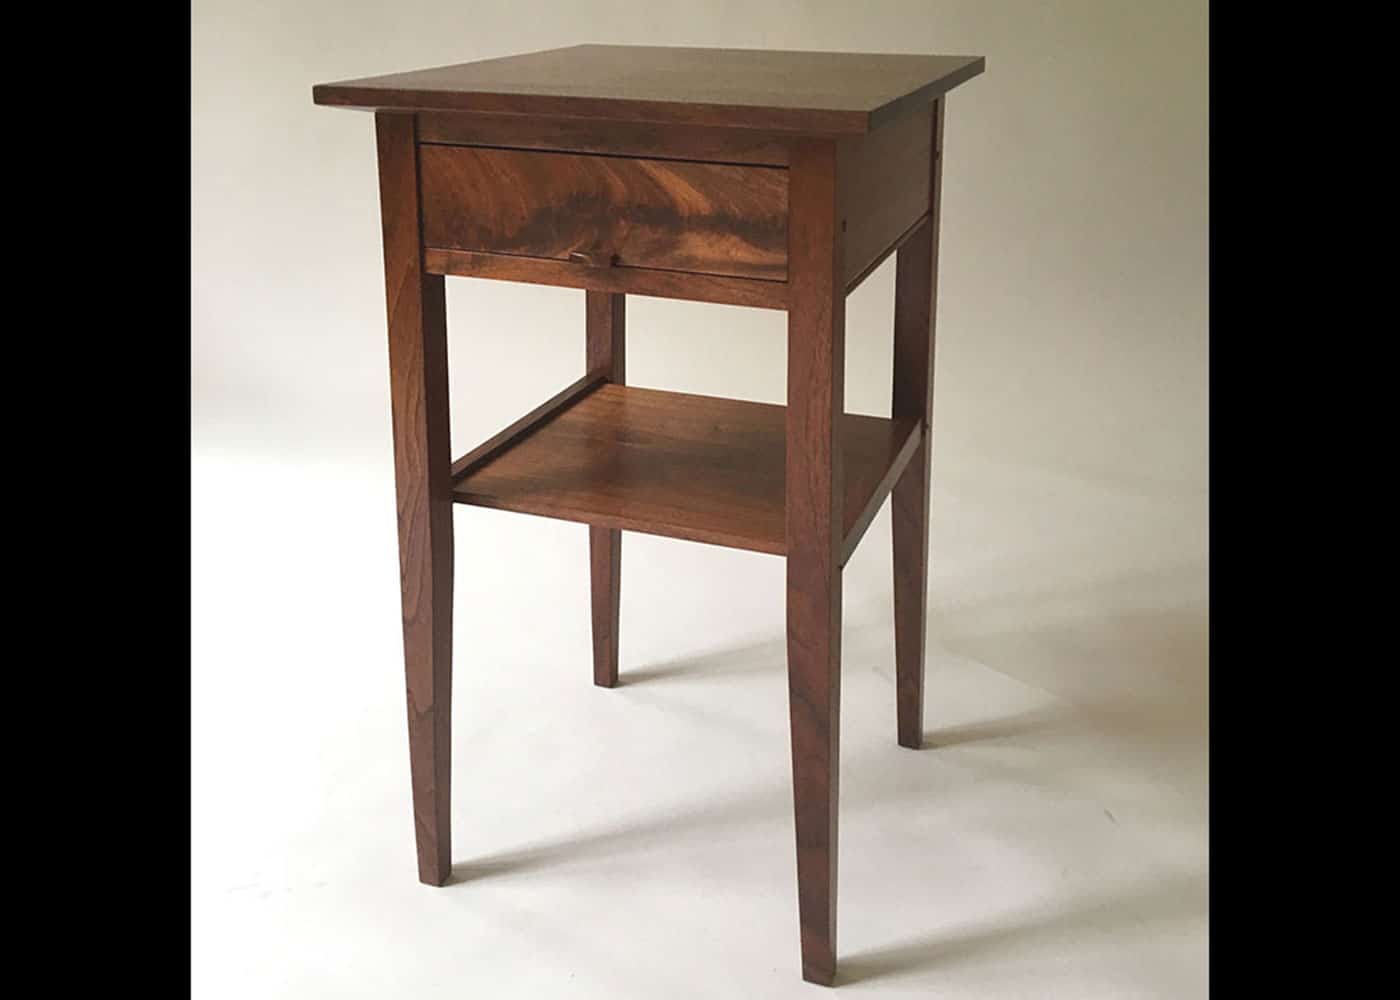 Walnut with Crotch Walnut Drawer Front Shaker Inspired Side Table